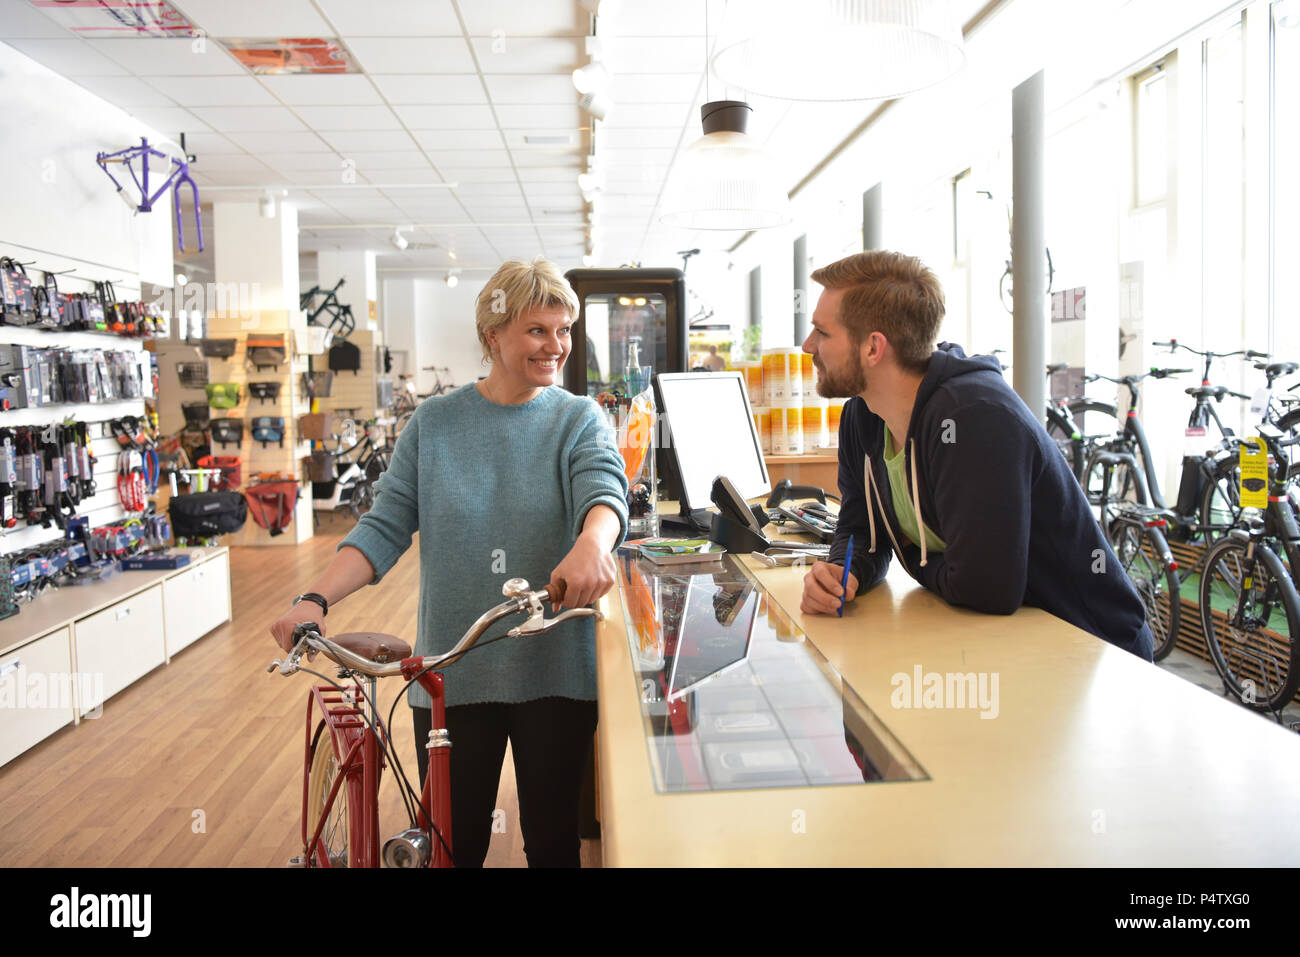 Salesperson helping customer in bicycle shop Stock Photo